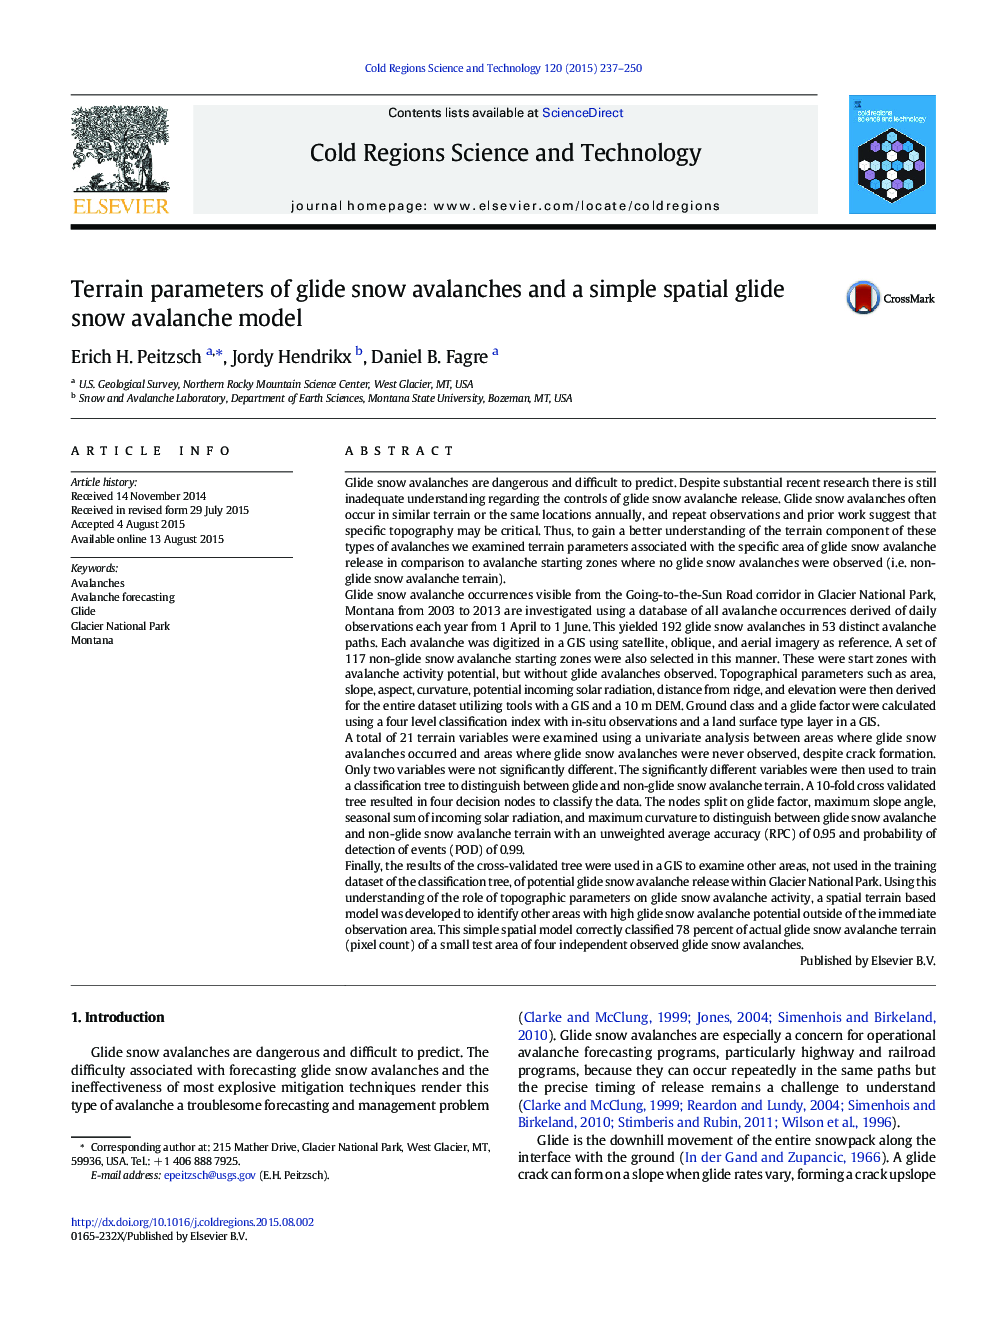 Terrain parameters of glide snow avalanches and a simple spatial glide snow avalanche model